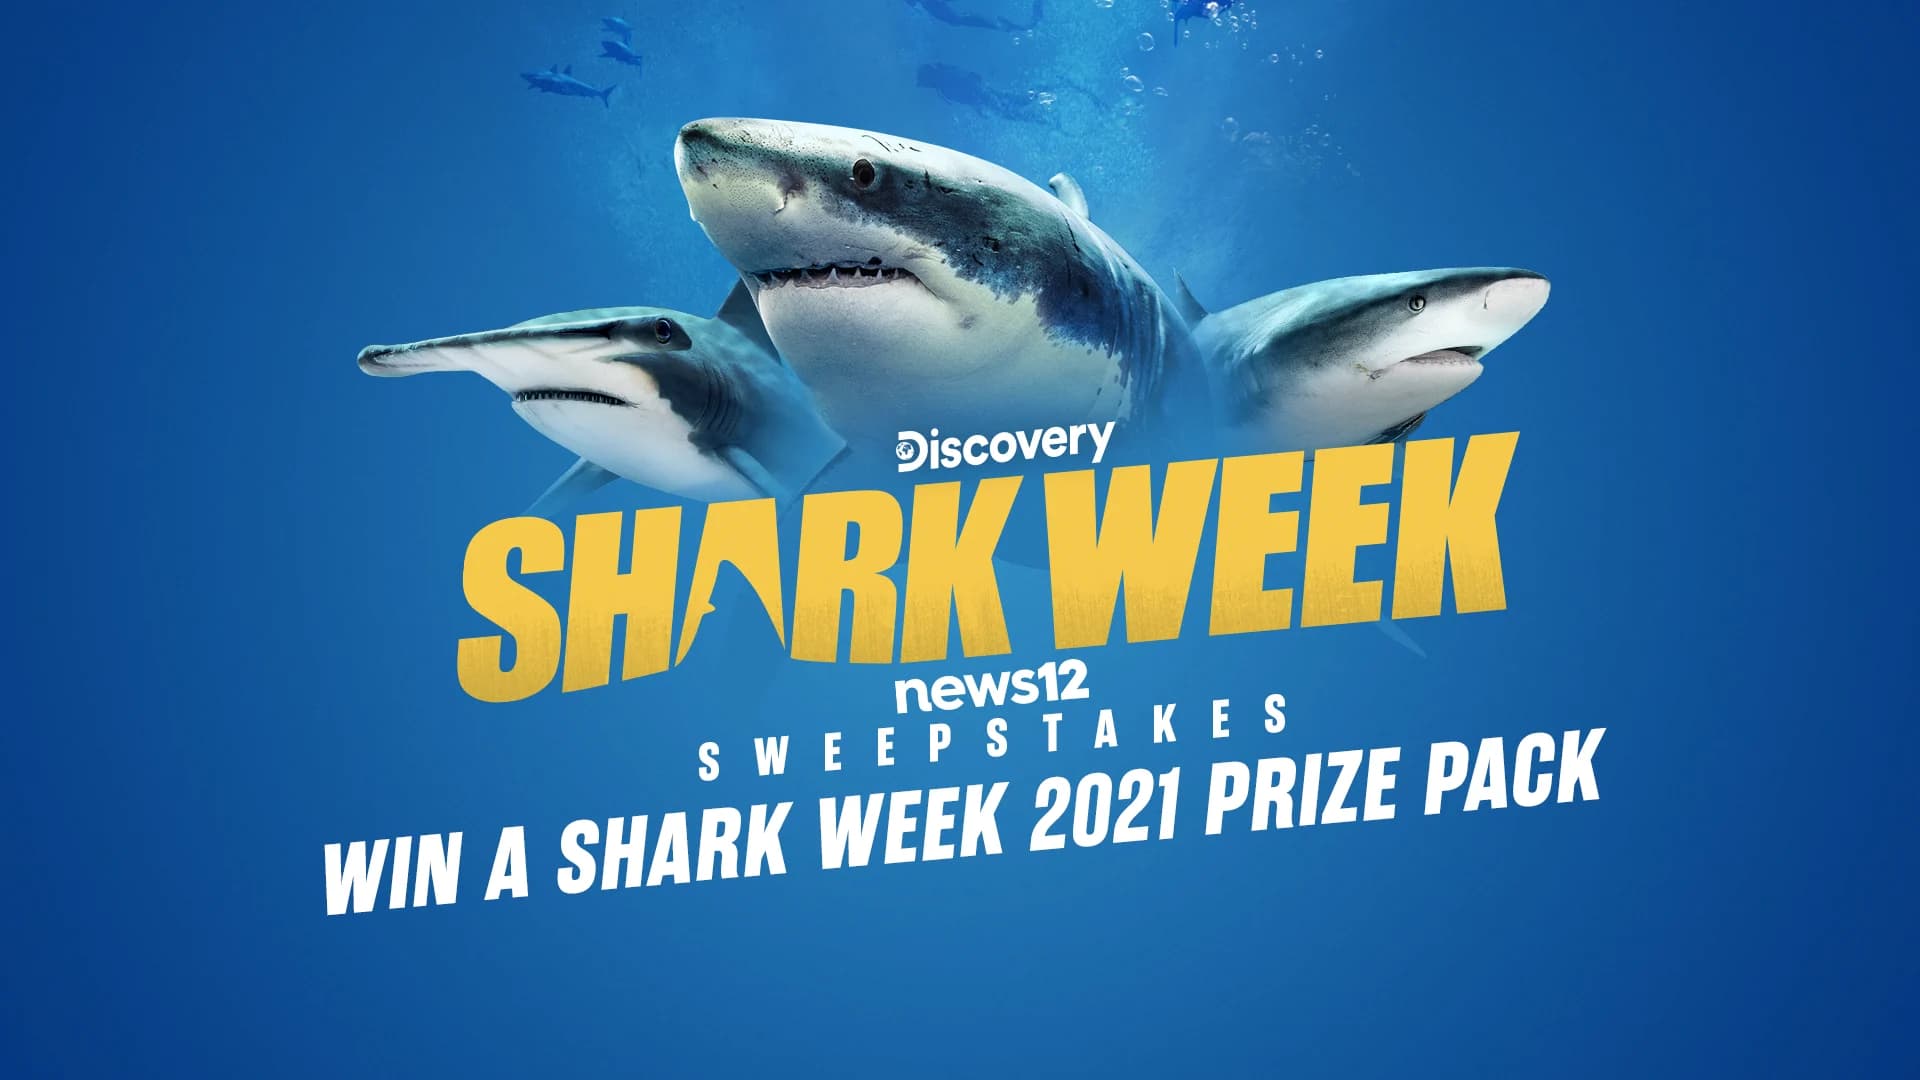 News 12 Shark Week  2021 Sweepstakes: Enter to win a 'Jaw-some' prize! 